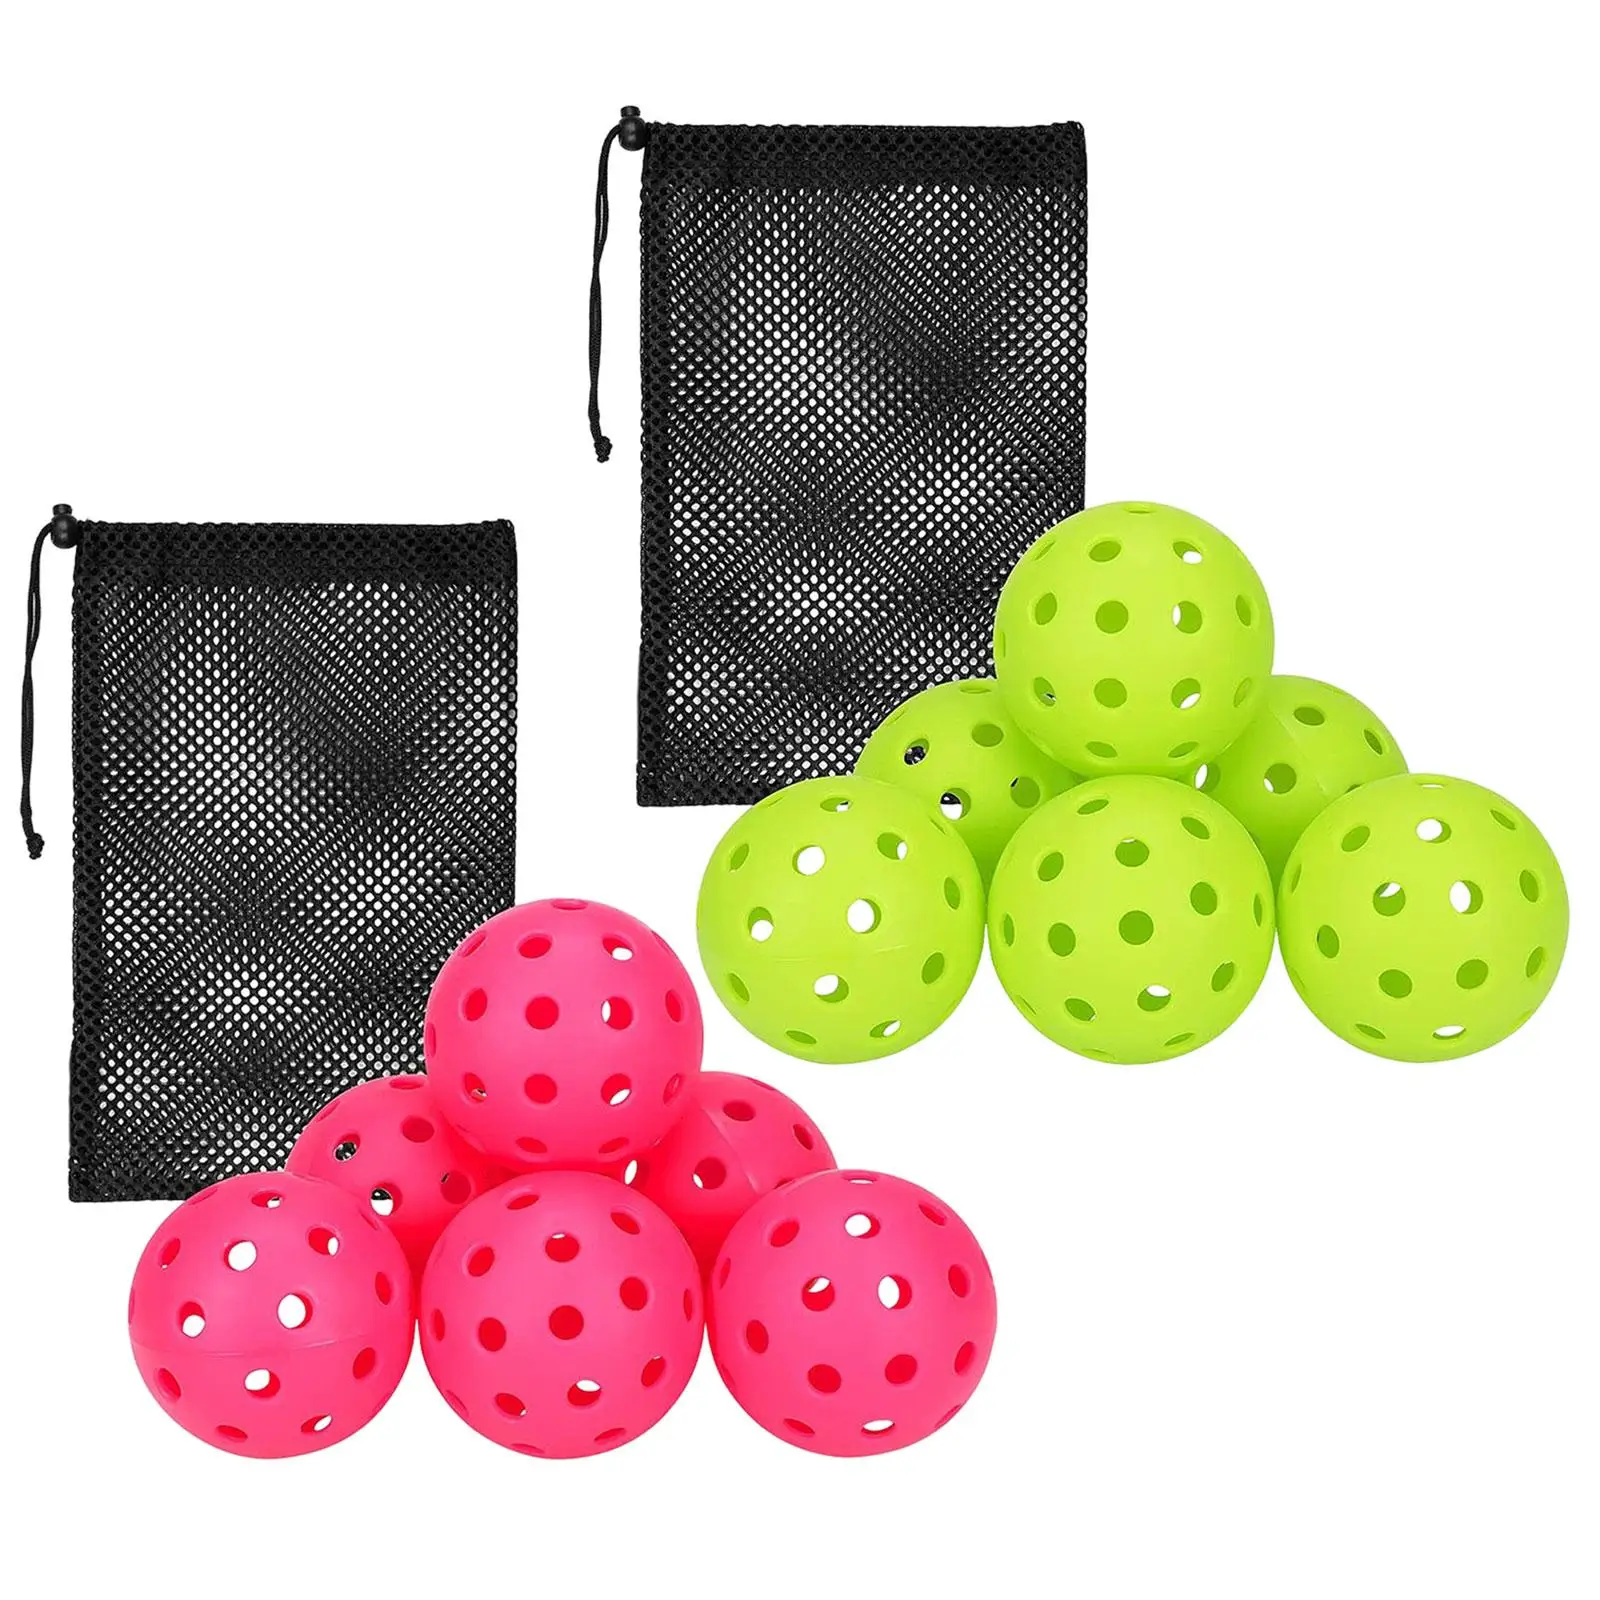 6x Pickleball Balls Professional Specifically Designed Durable Official Size Ball for Outdoor Courts Sanctioned Tournament Play